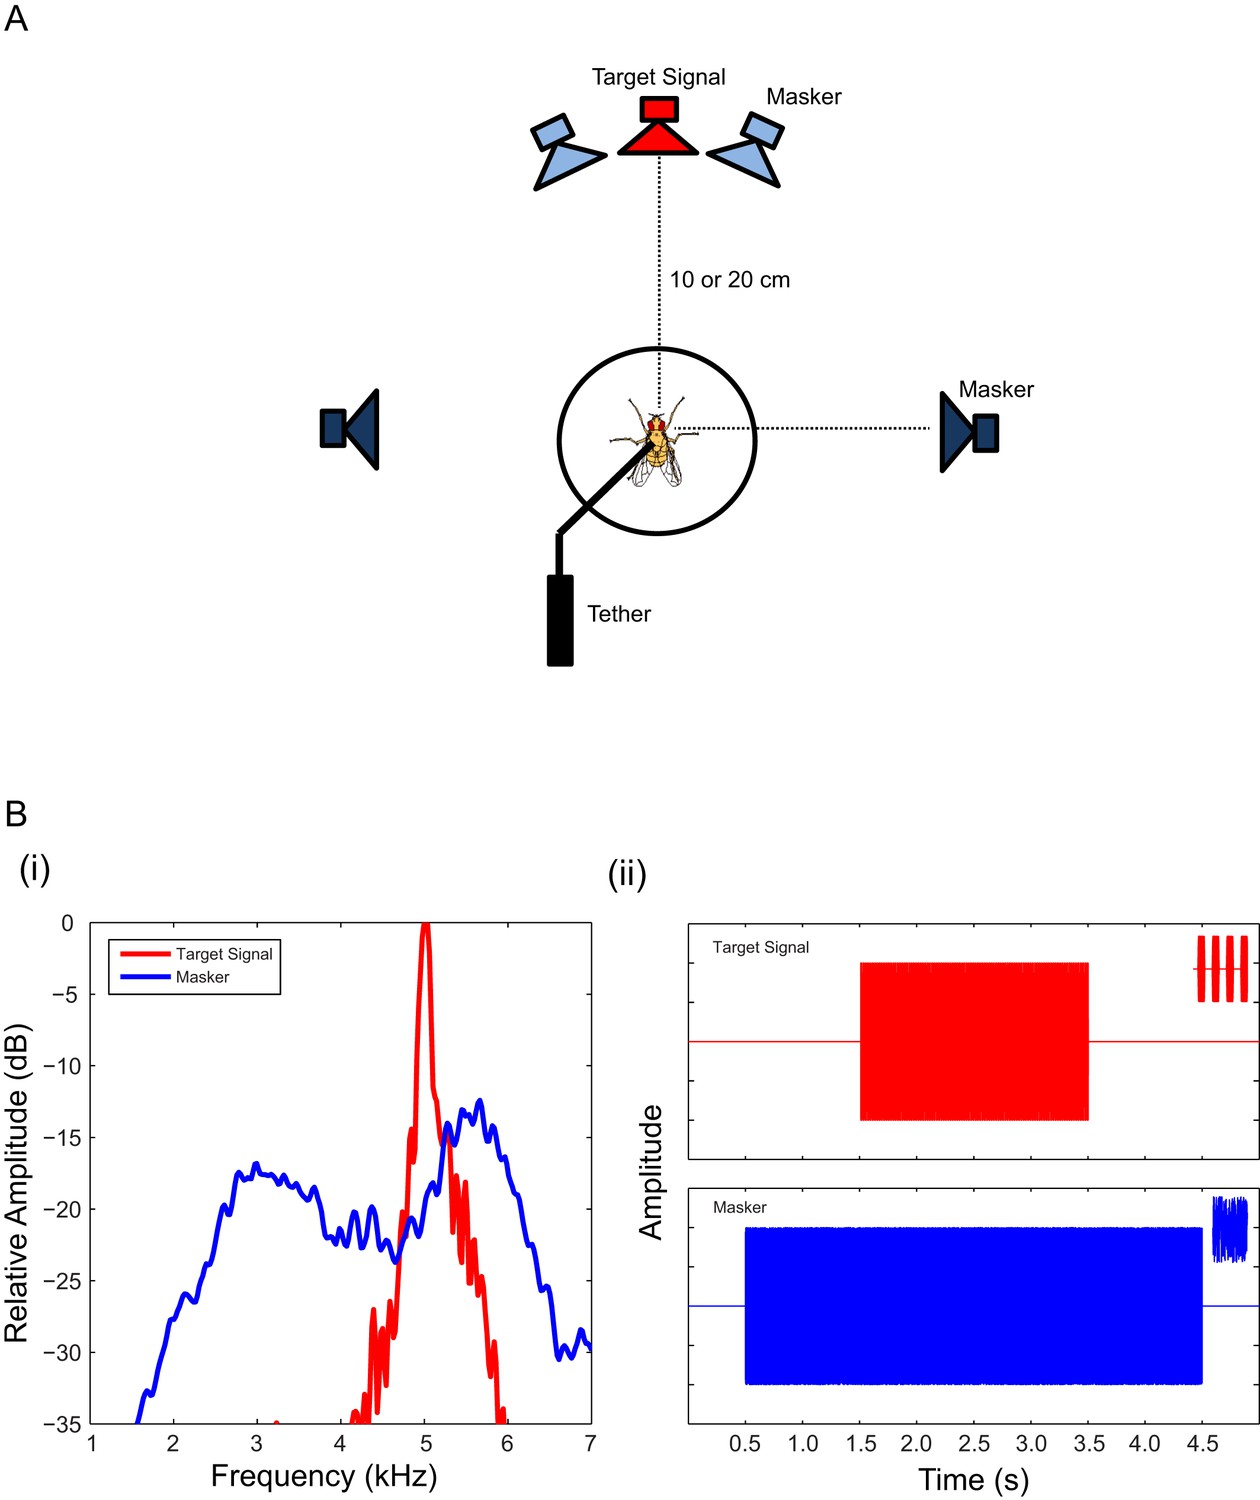 How spatial release from masking may fail to function a highly directional system | eLife